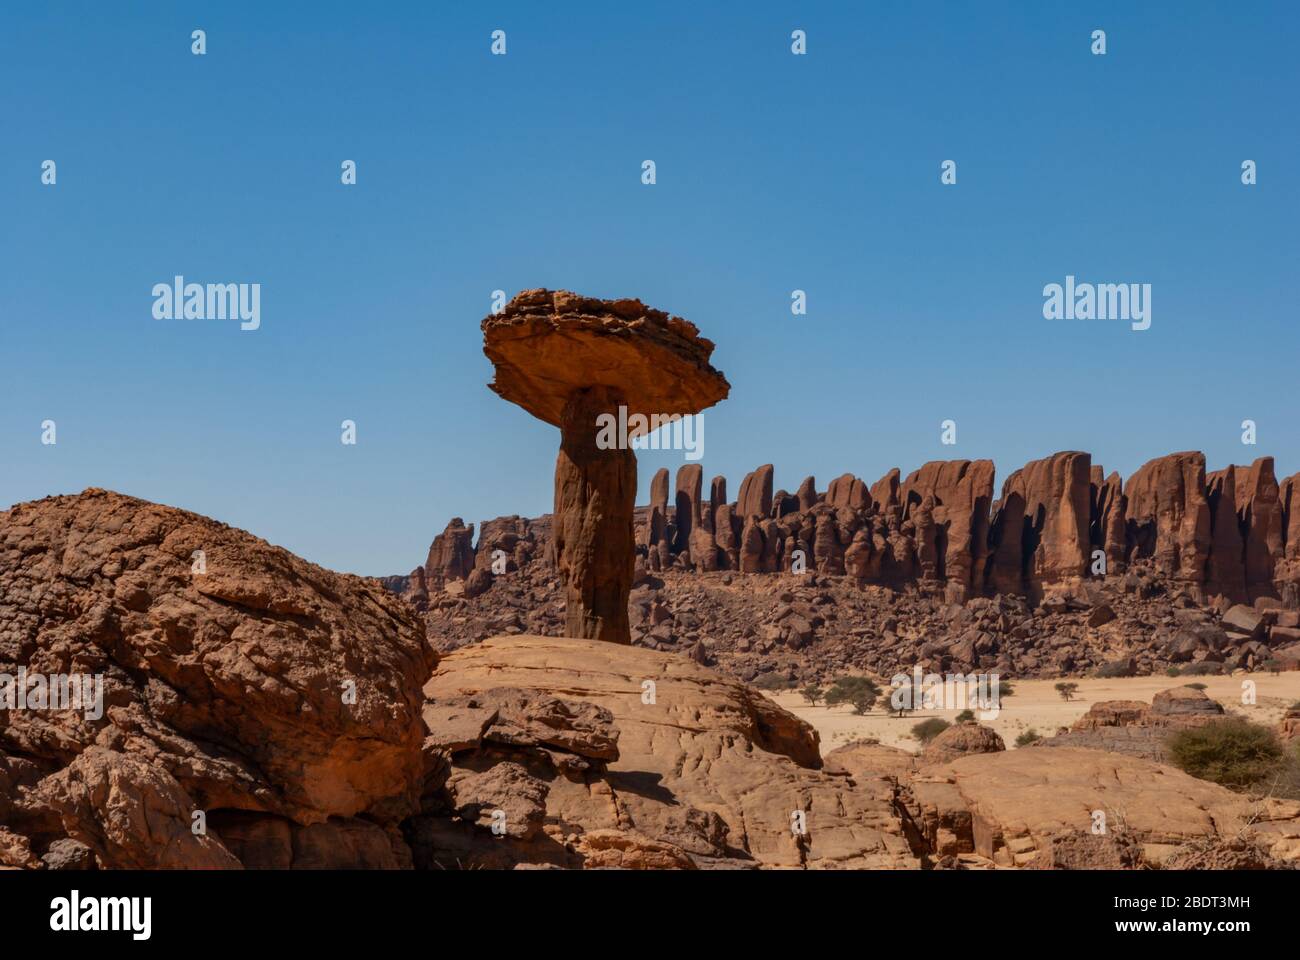 Sandstone towers in form of mushroom in the Ennedi desert of Chad, Africa Stock Photo